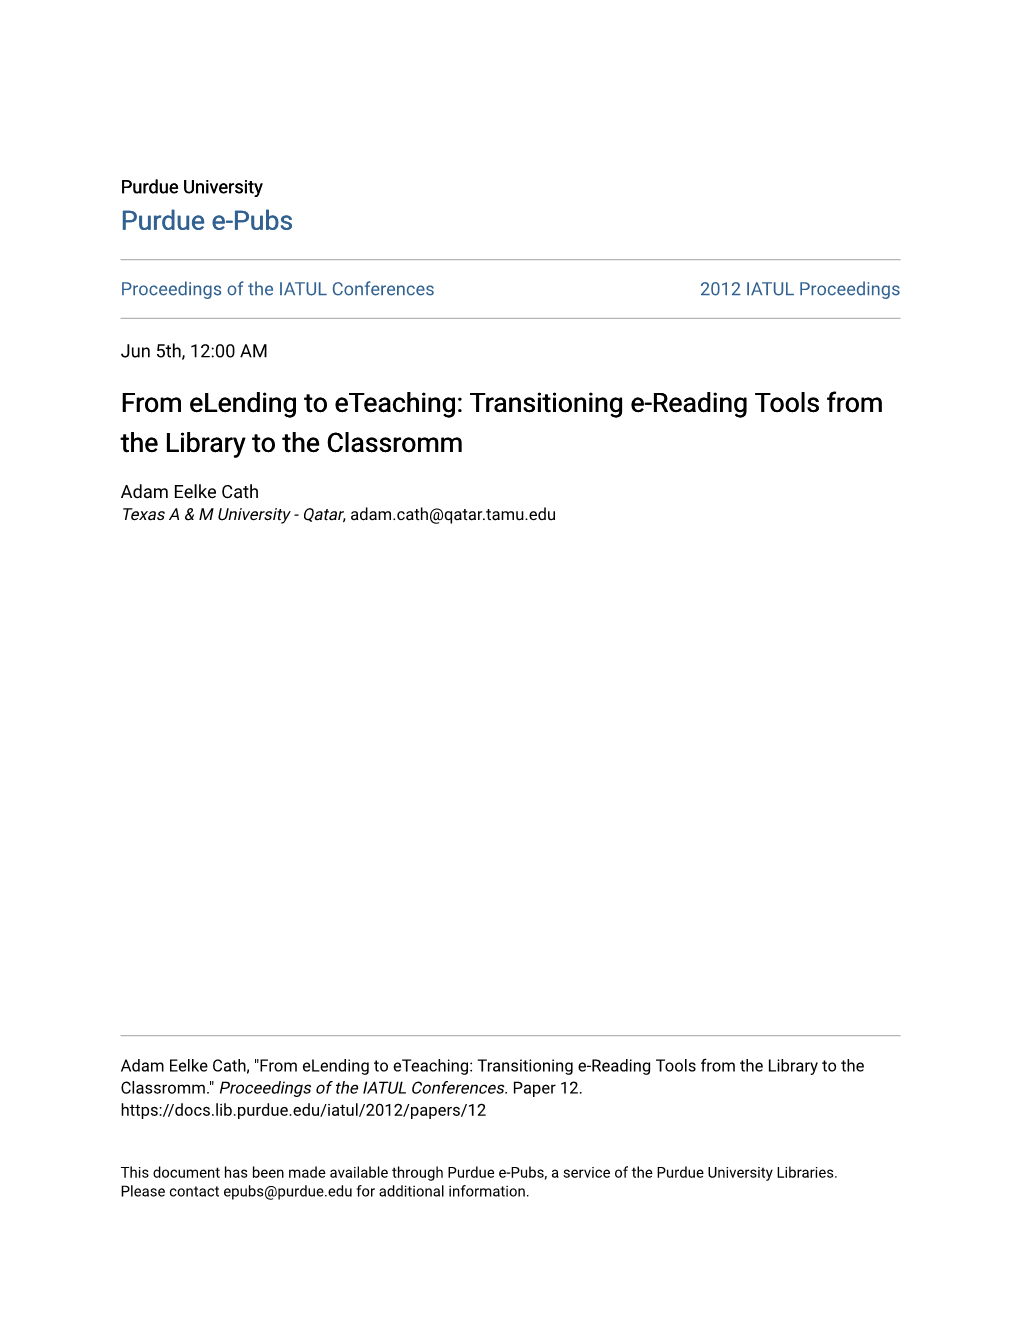 Transitioning E-Reading Tools from the Library to the Classromm